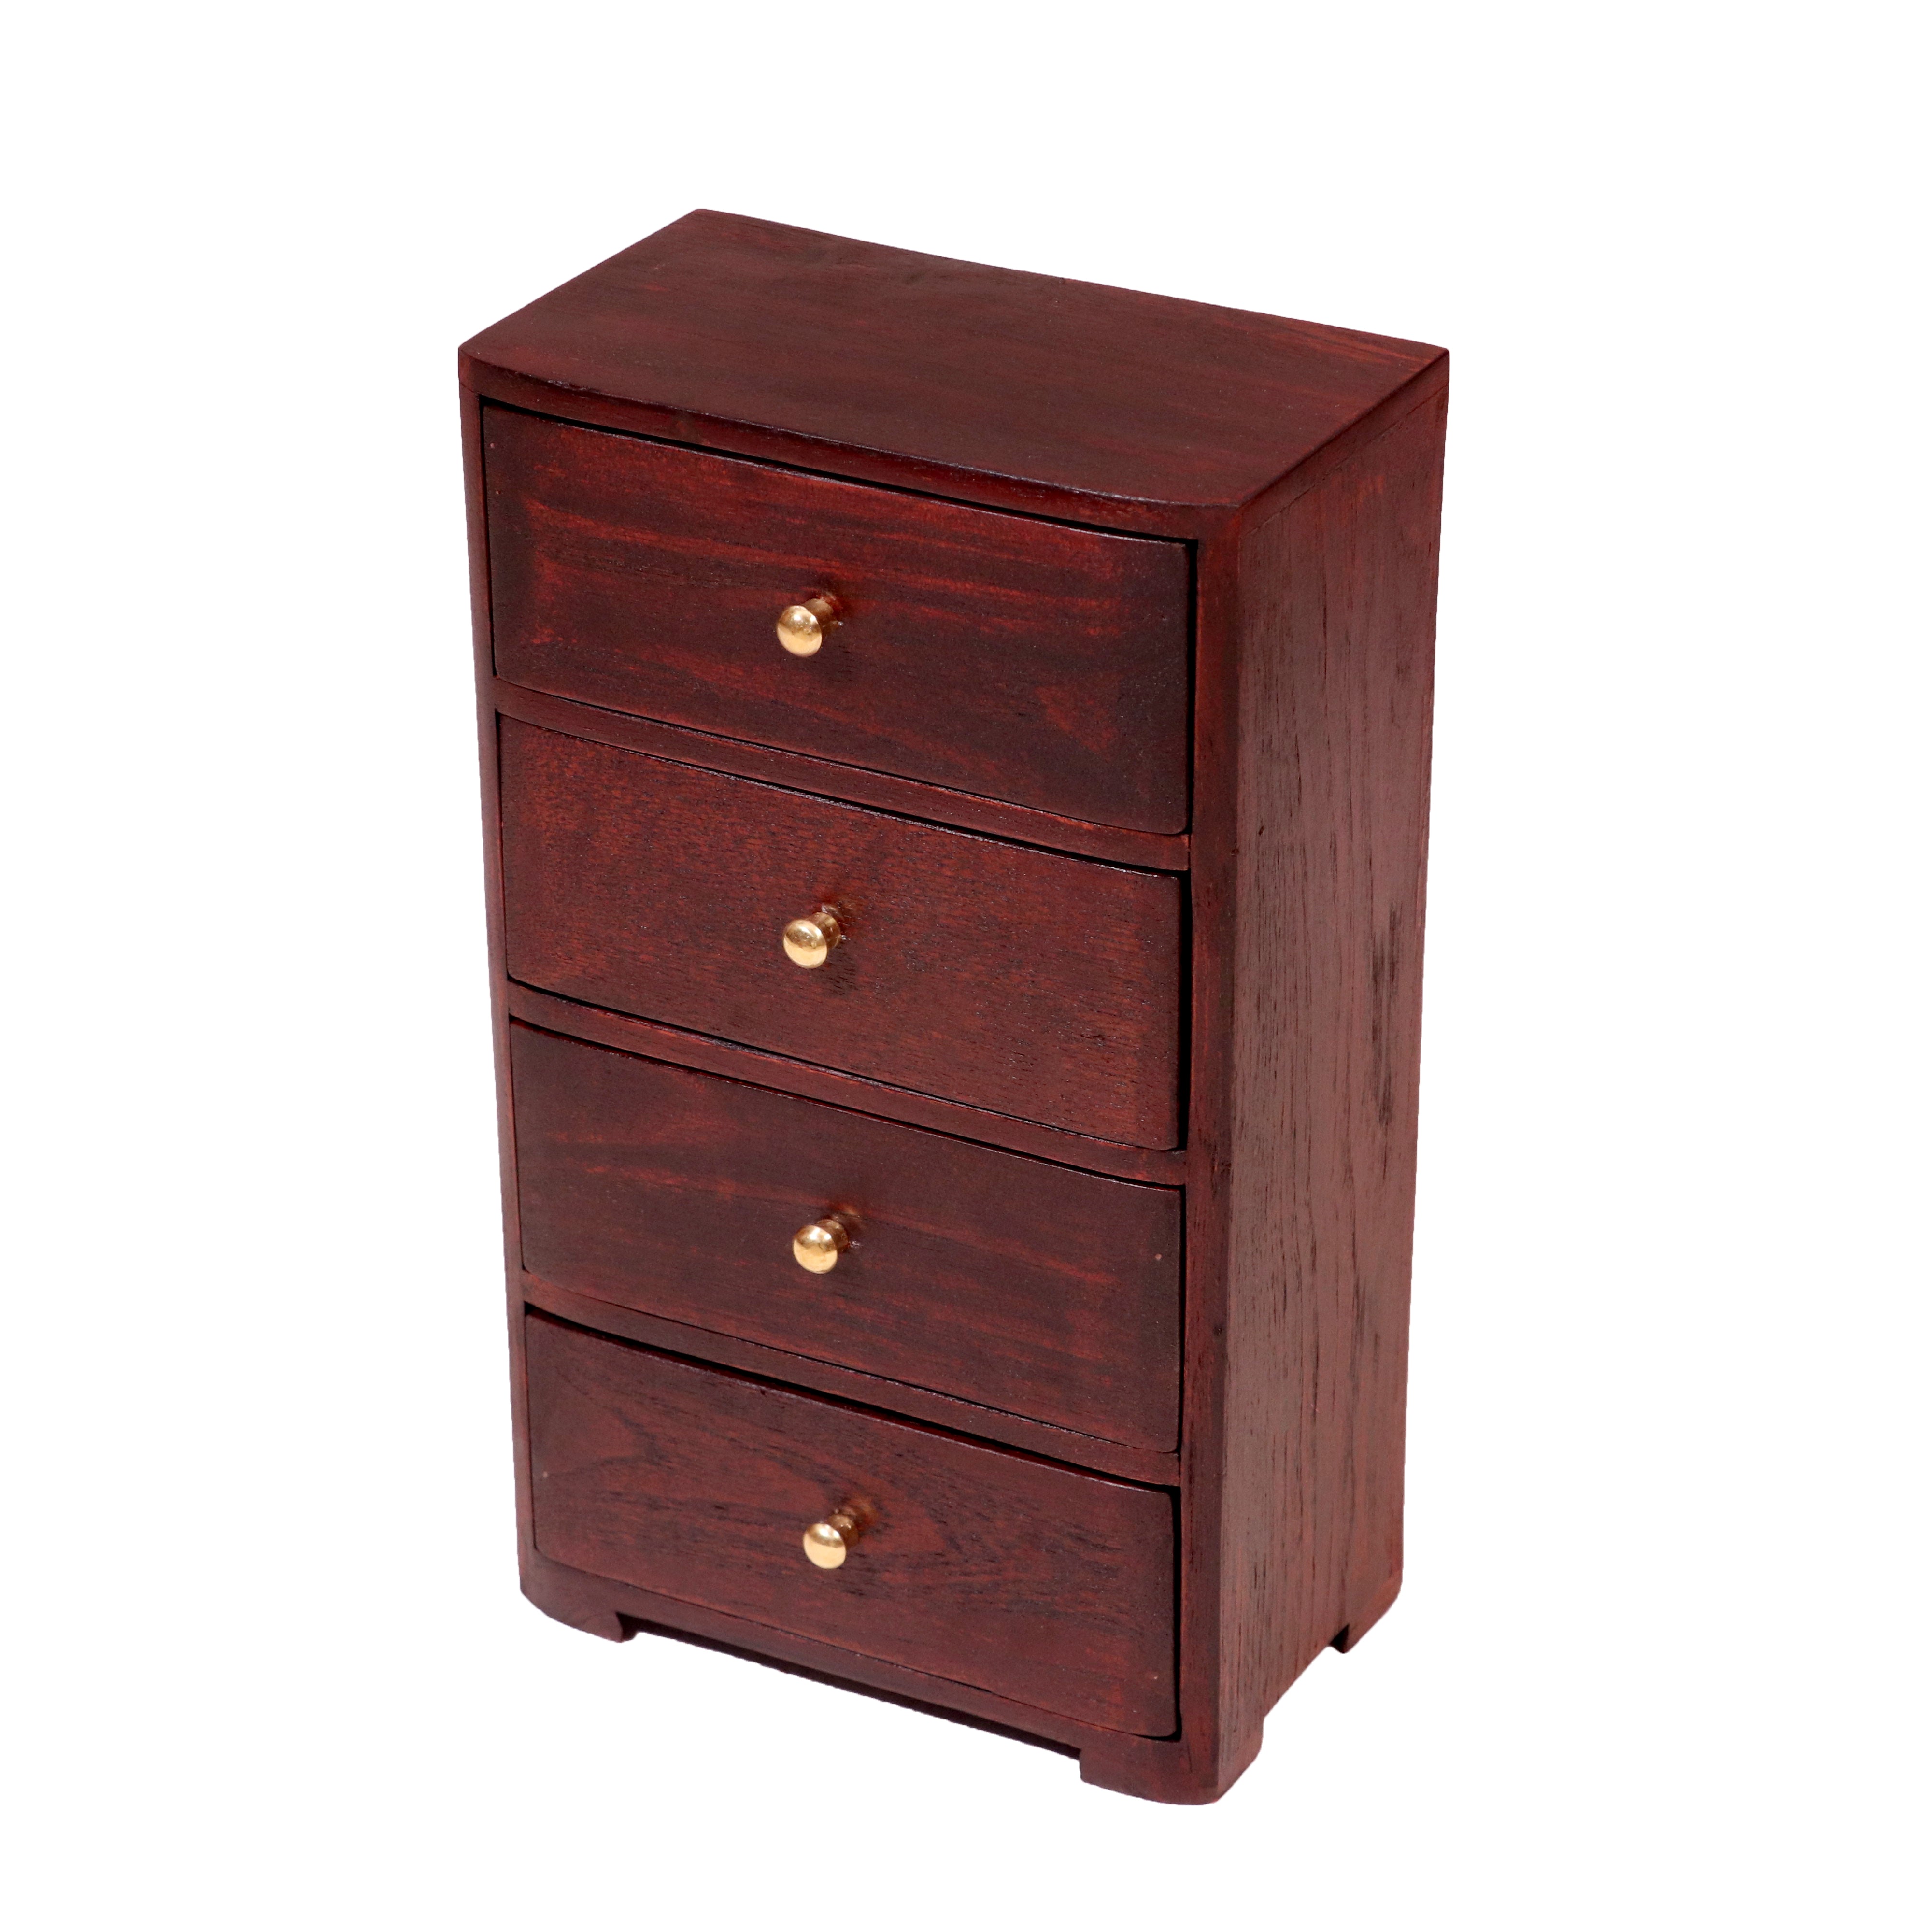 Compartment Miniature Chests Of Drawers (Mahogany Touch) Desk Organizer